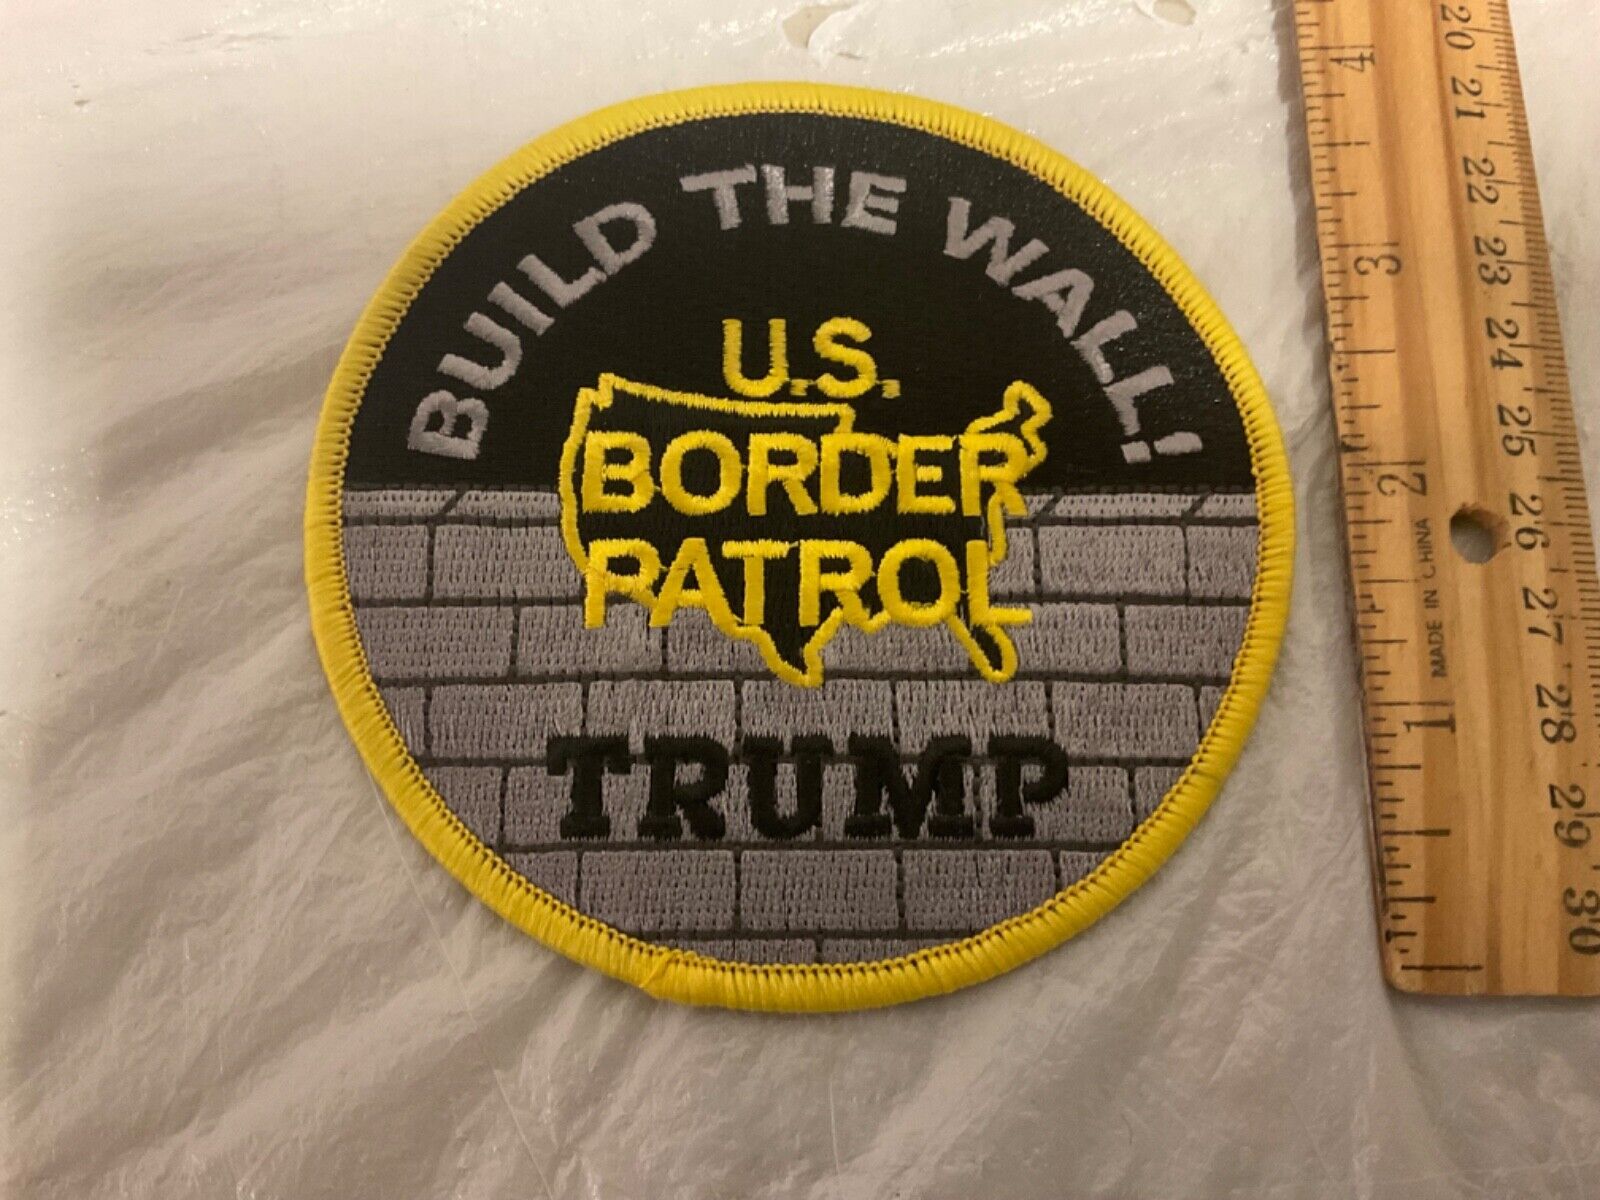 Trump Build The Wall U.S. Boarder Patrol political collection patch